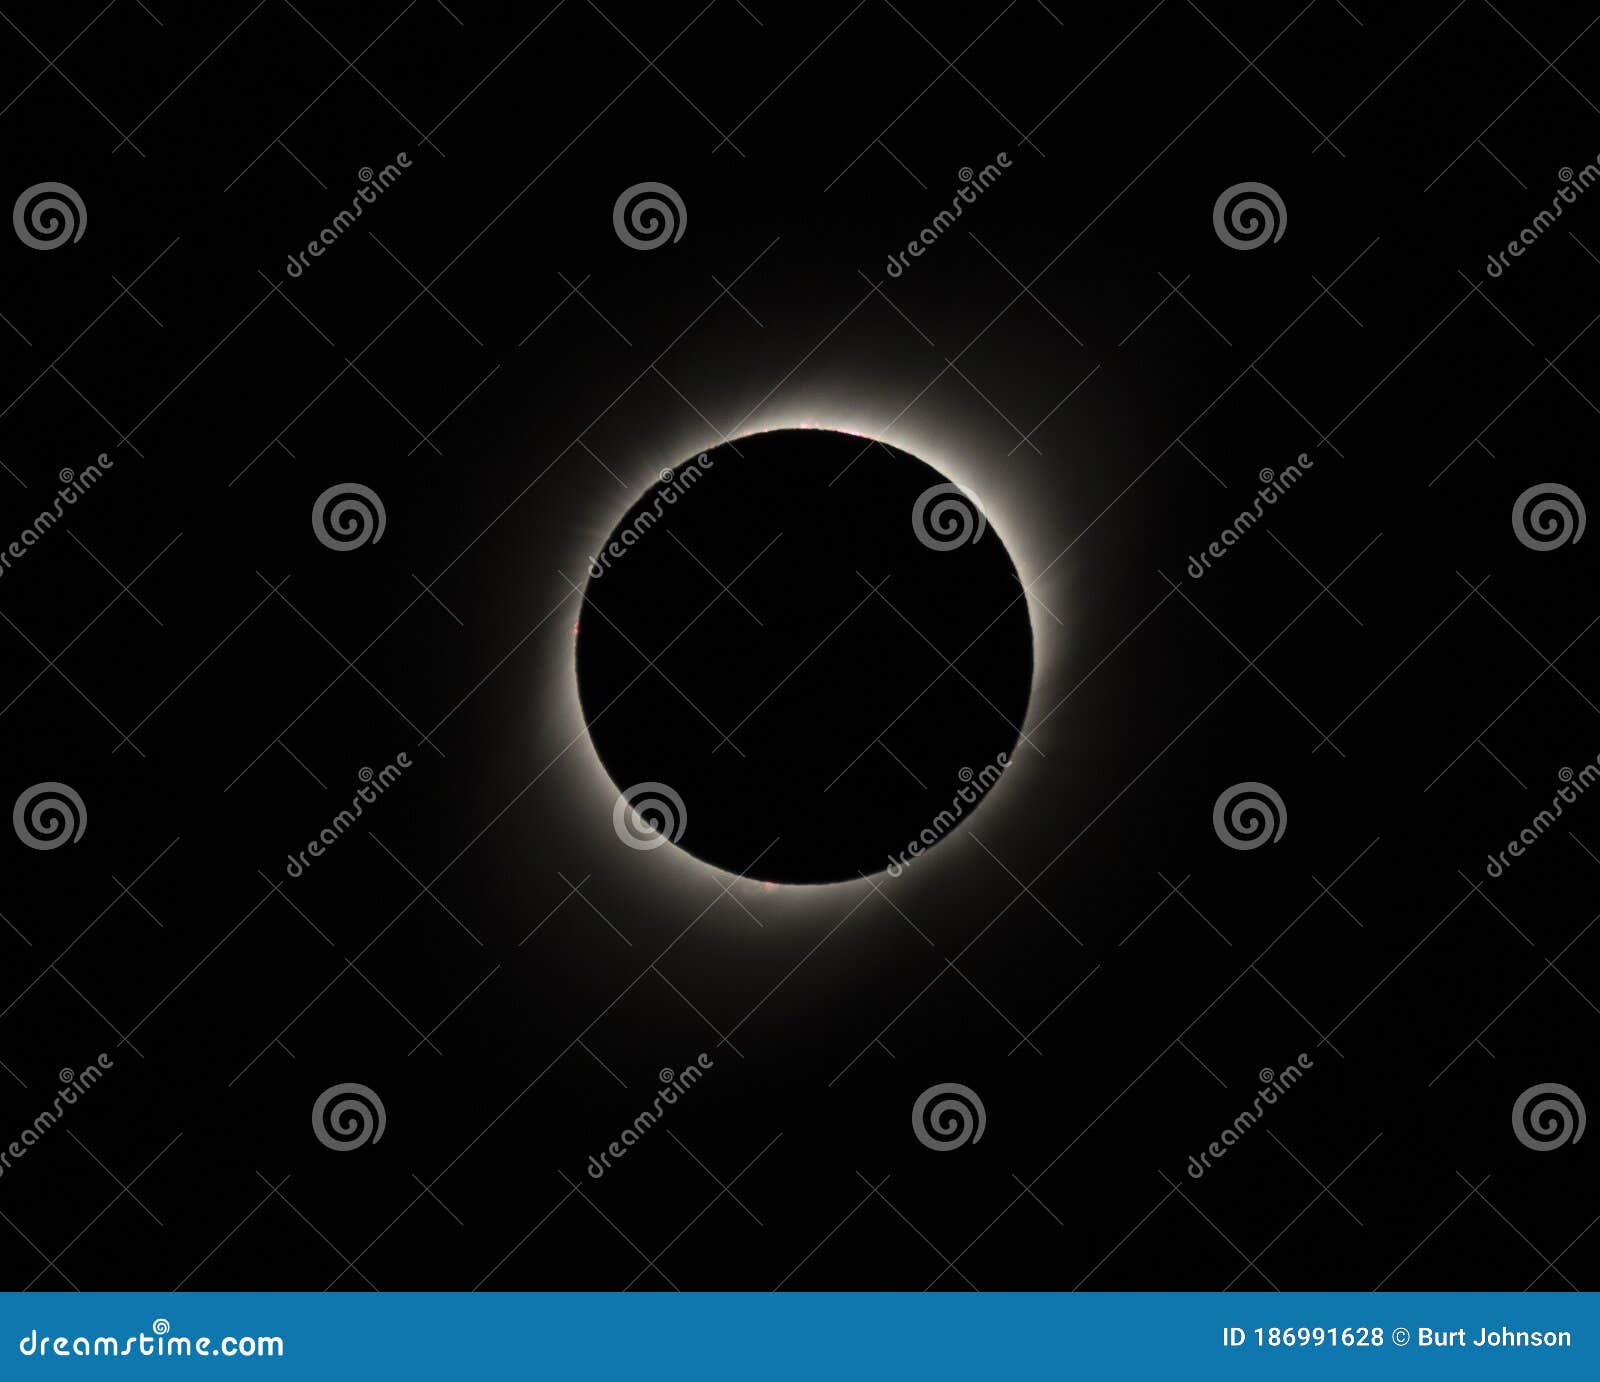 solar eclipse at totality seen from vacuna chile on july 2, 2019